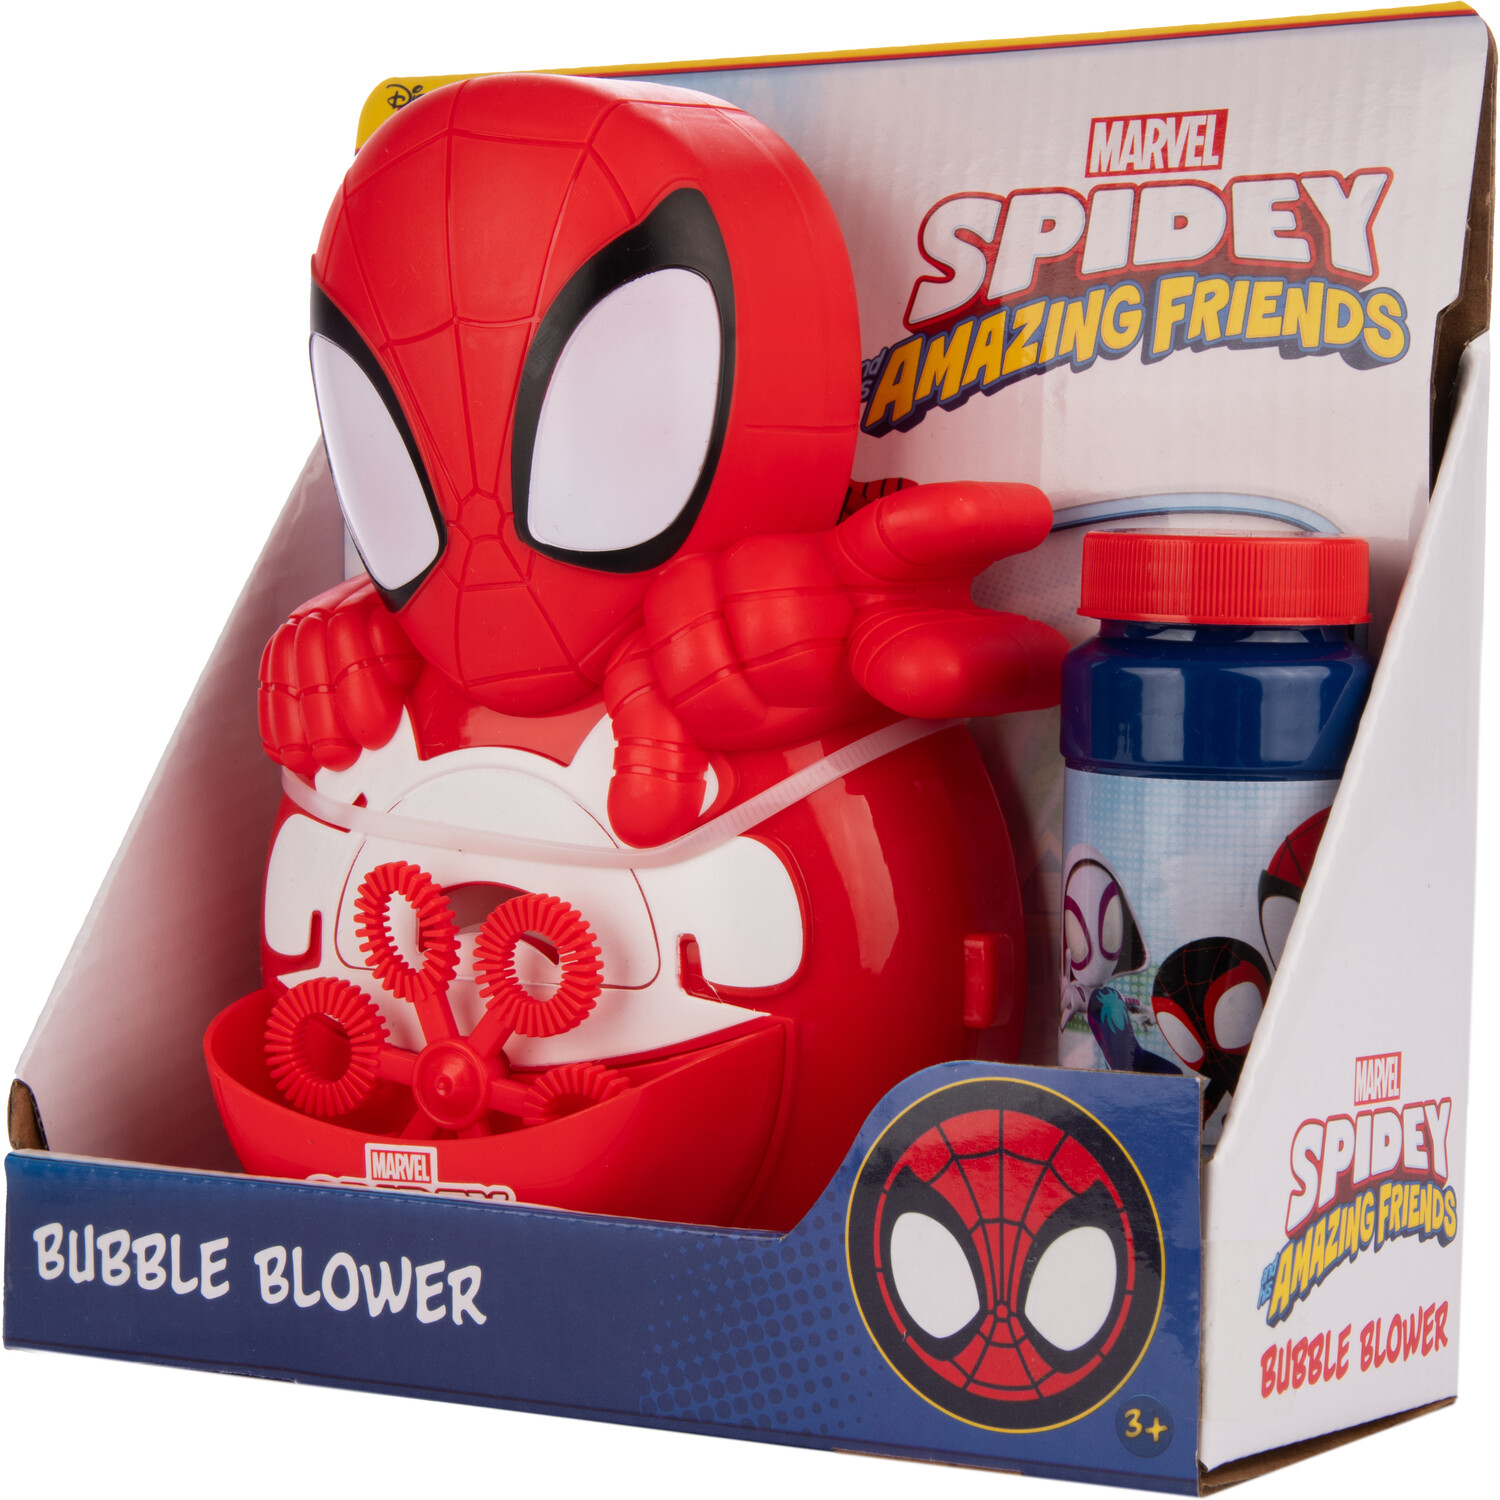 Spidey and his Amazing Friends Bubble Blower - Red Image 2